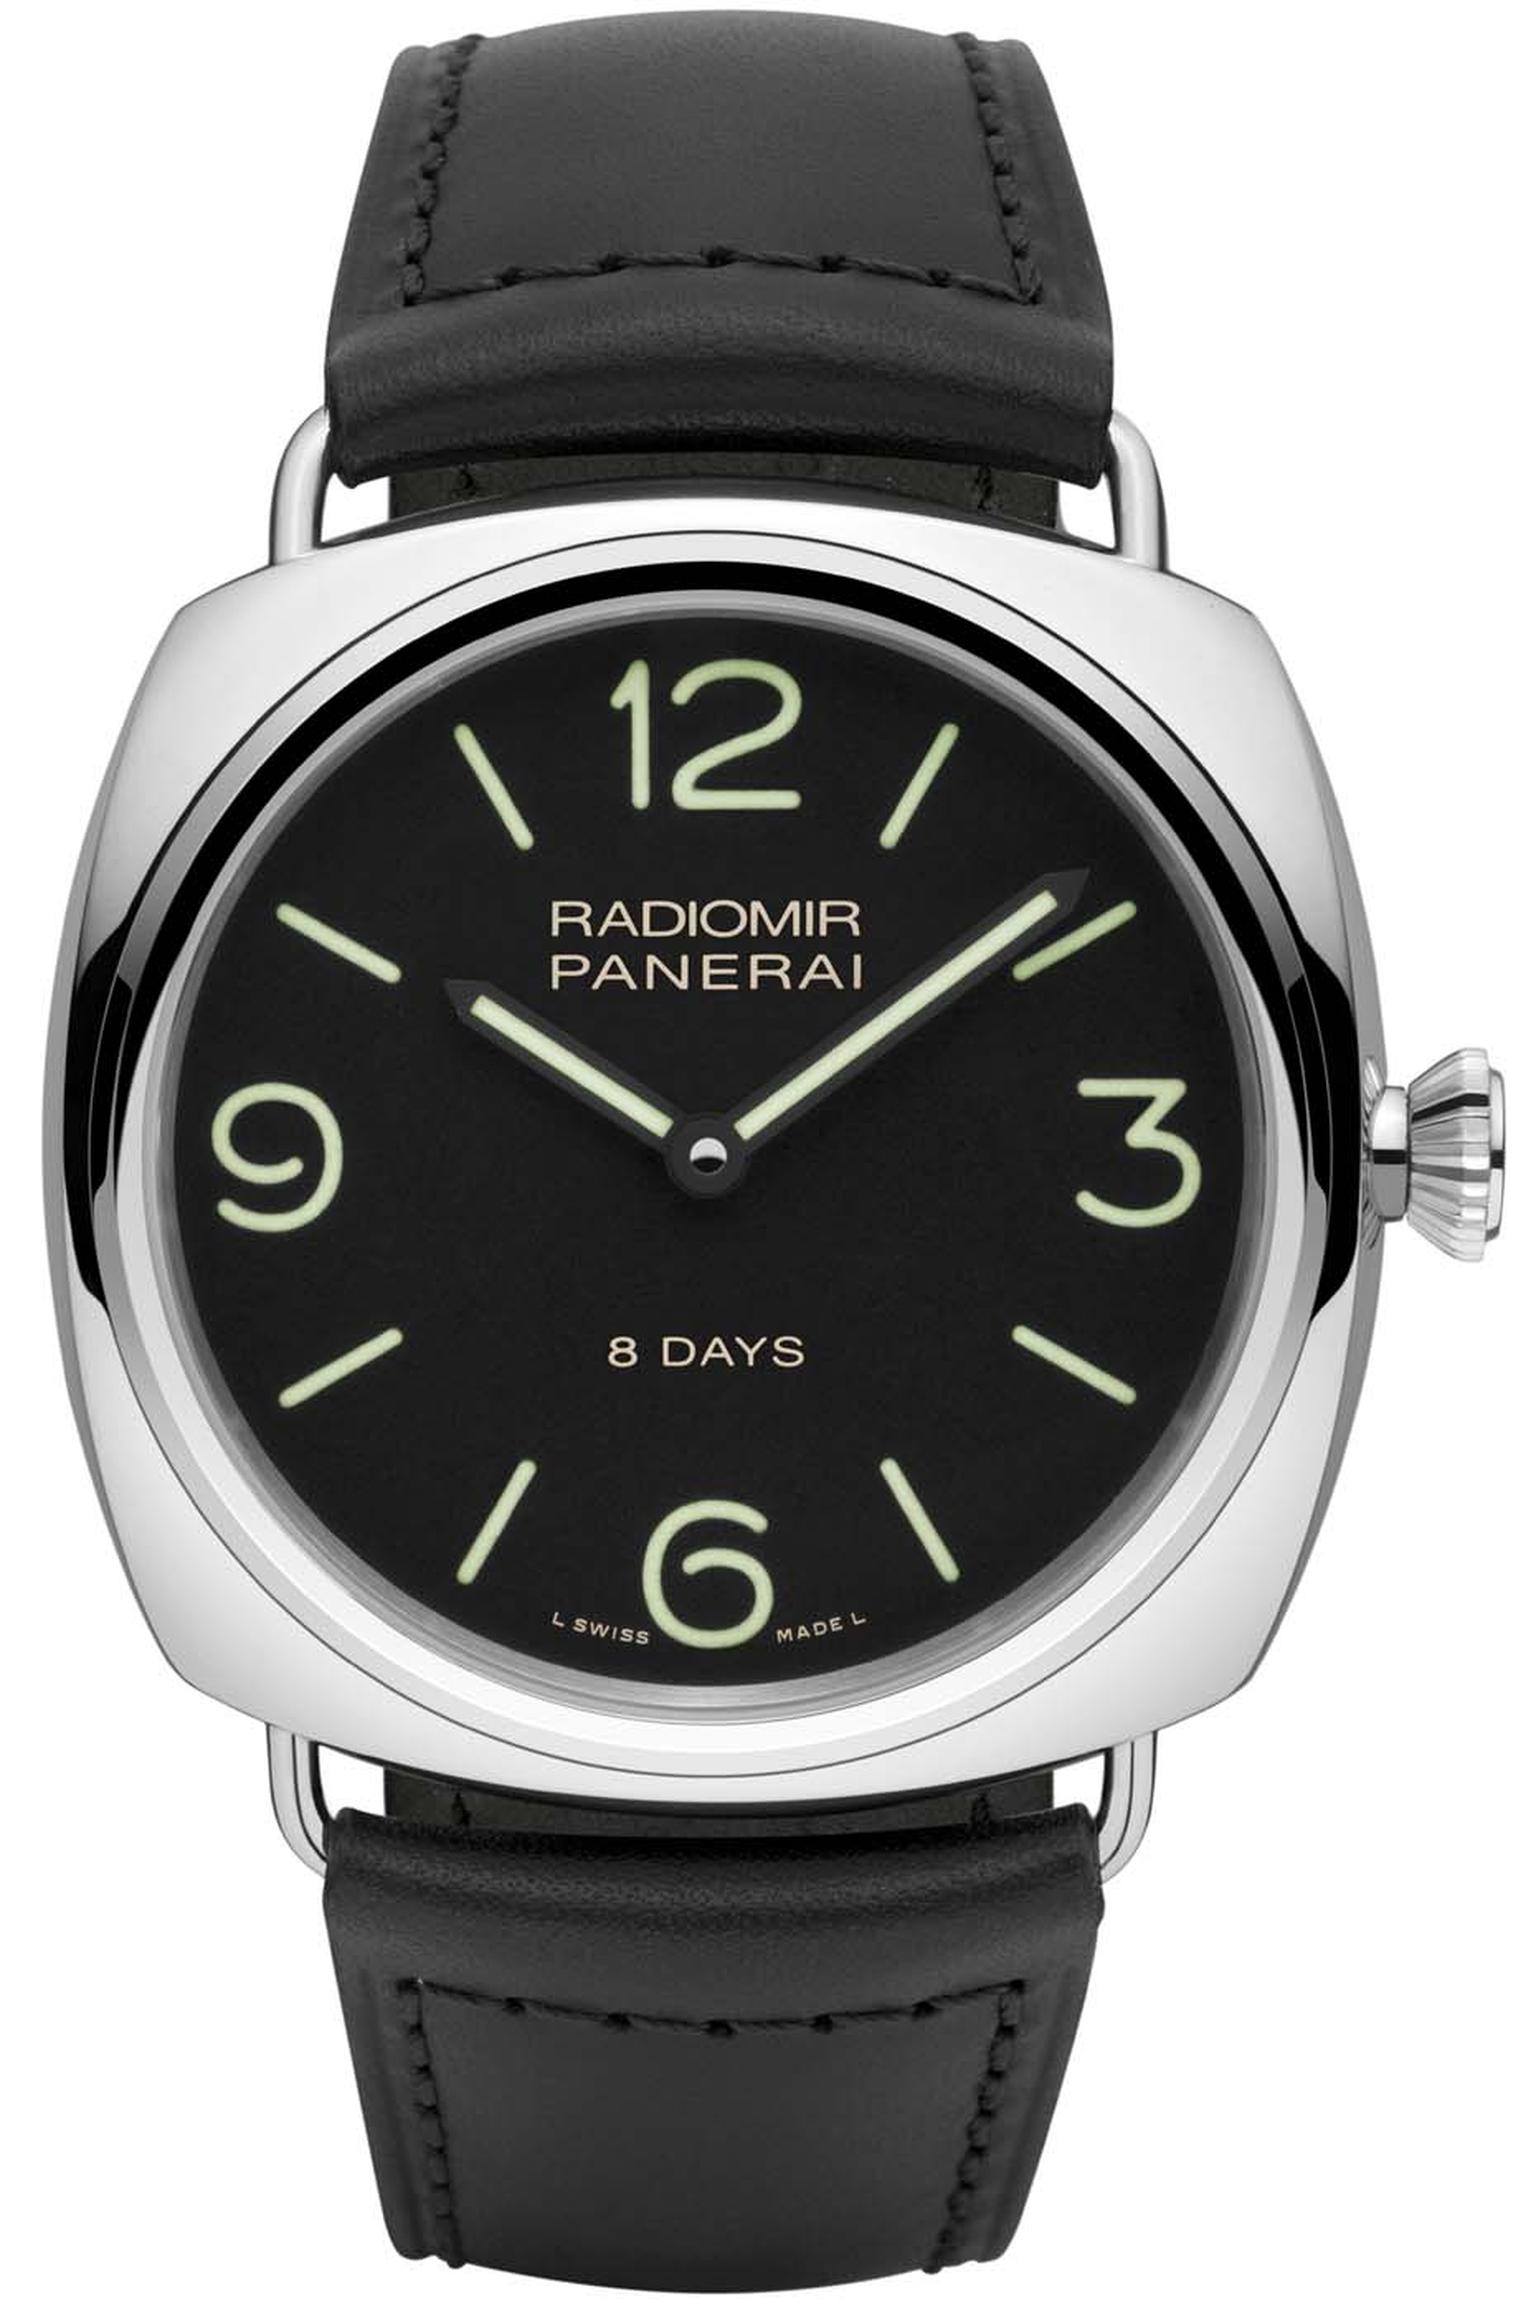 The new Panerai Radiomir 8 Days Acciaio watch bears the genetic traits of the first Radiomir professional military models released in the late 1930s. The novelty here is the incorporation of Panerai's in-house P.5000 movement, capable of keeping the watch